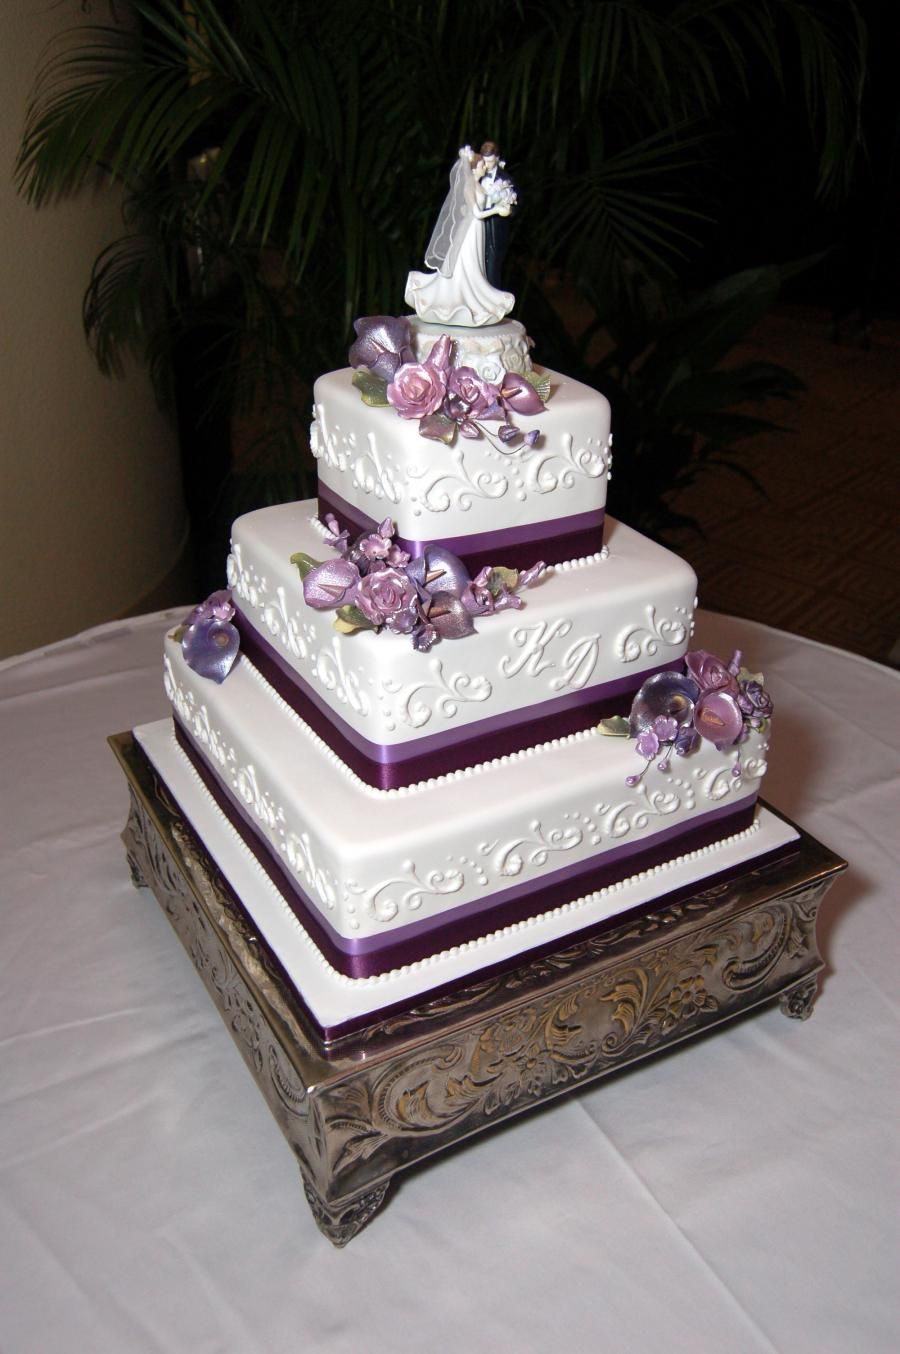 Wedding Cakes Square
 This 3 tier square wedding cake is simple and elegant